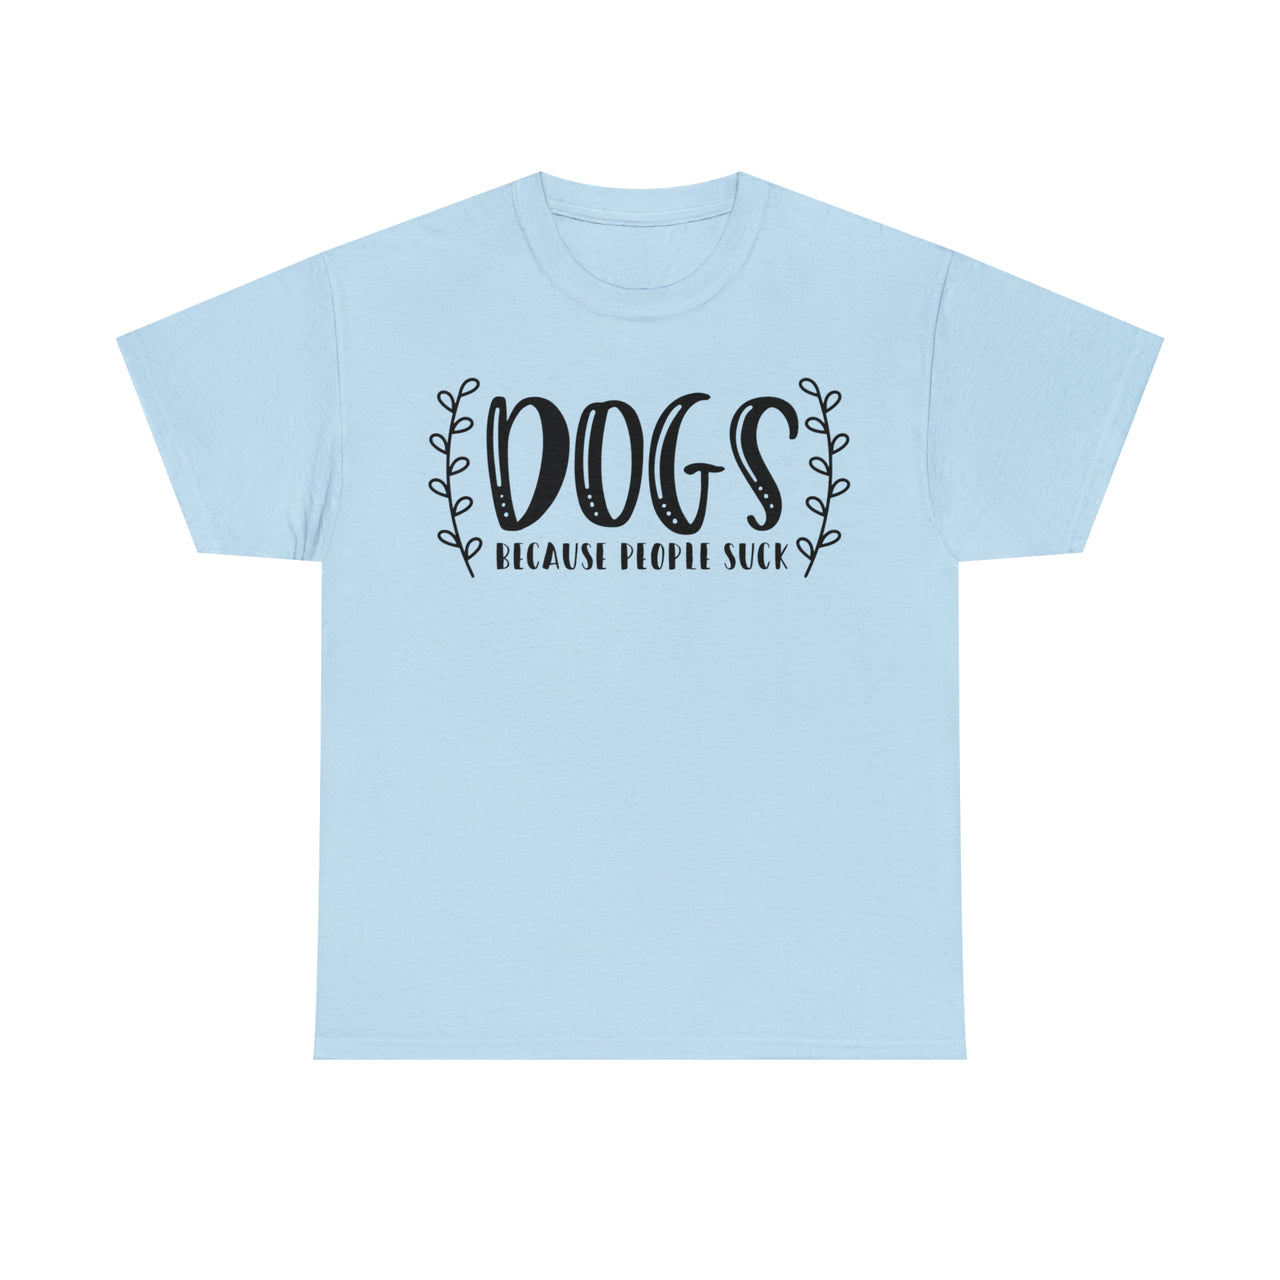 Dogs Because People Suck 🐕 Unisex T-Shirt